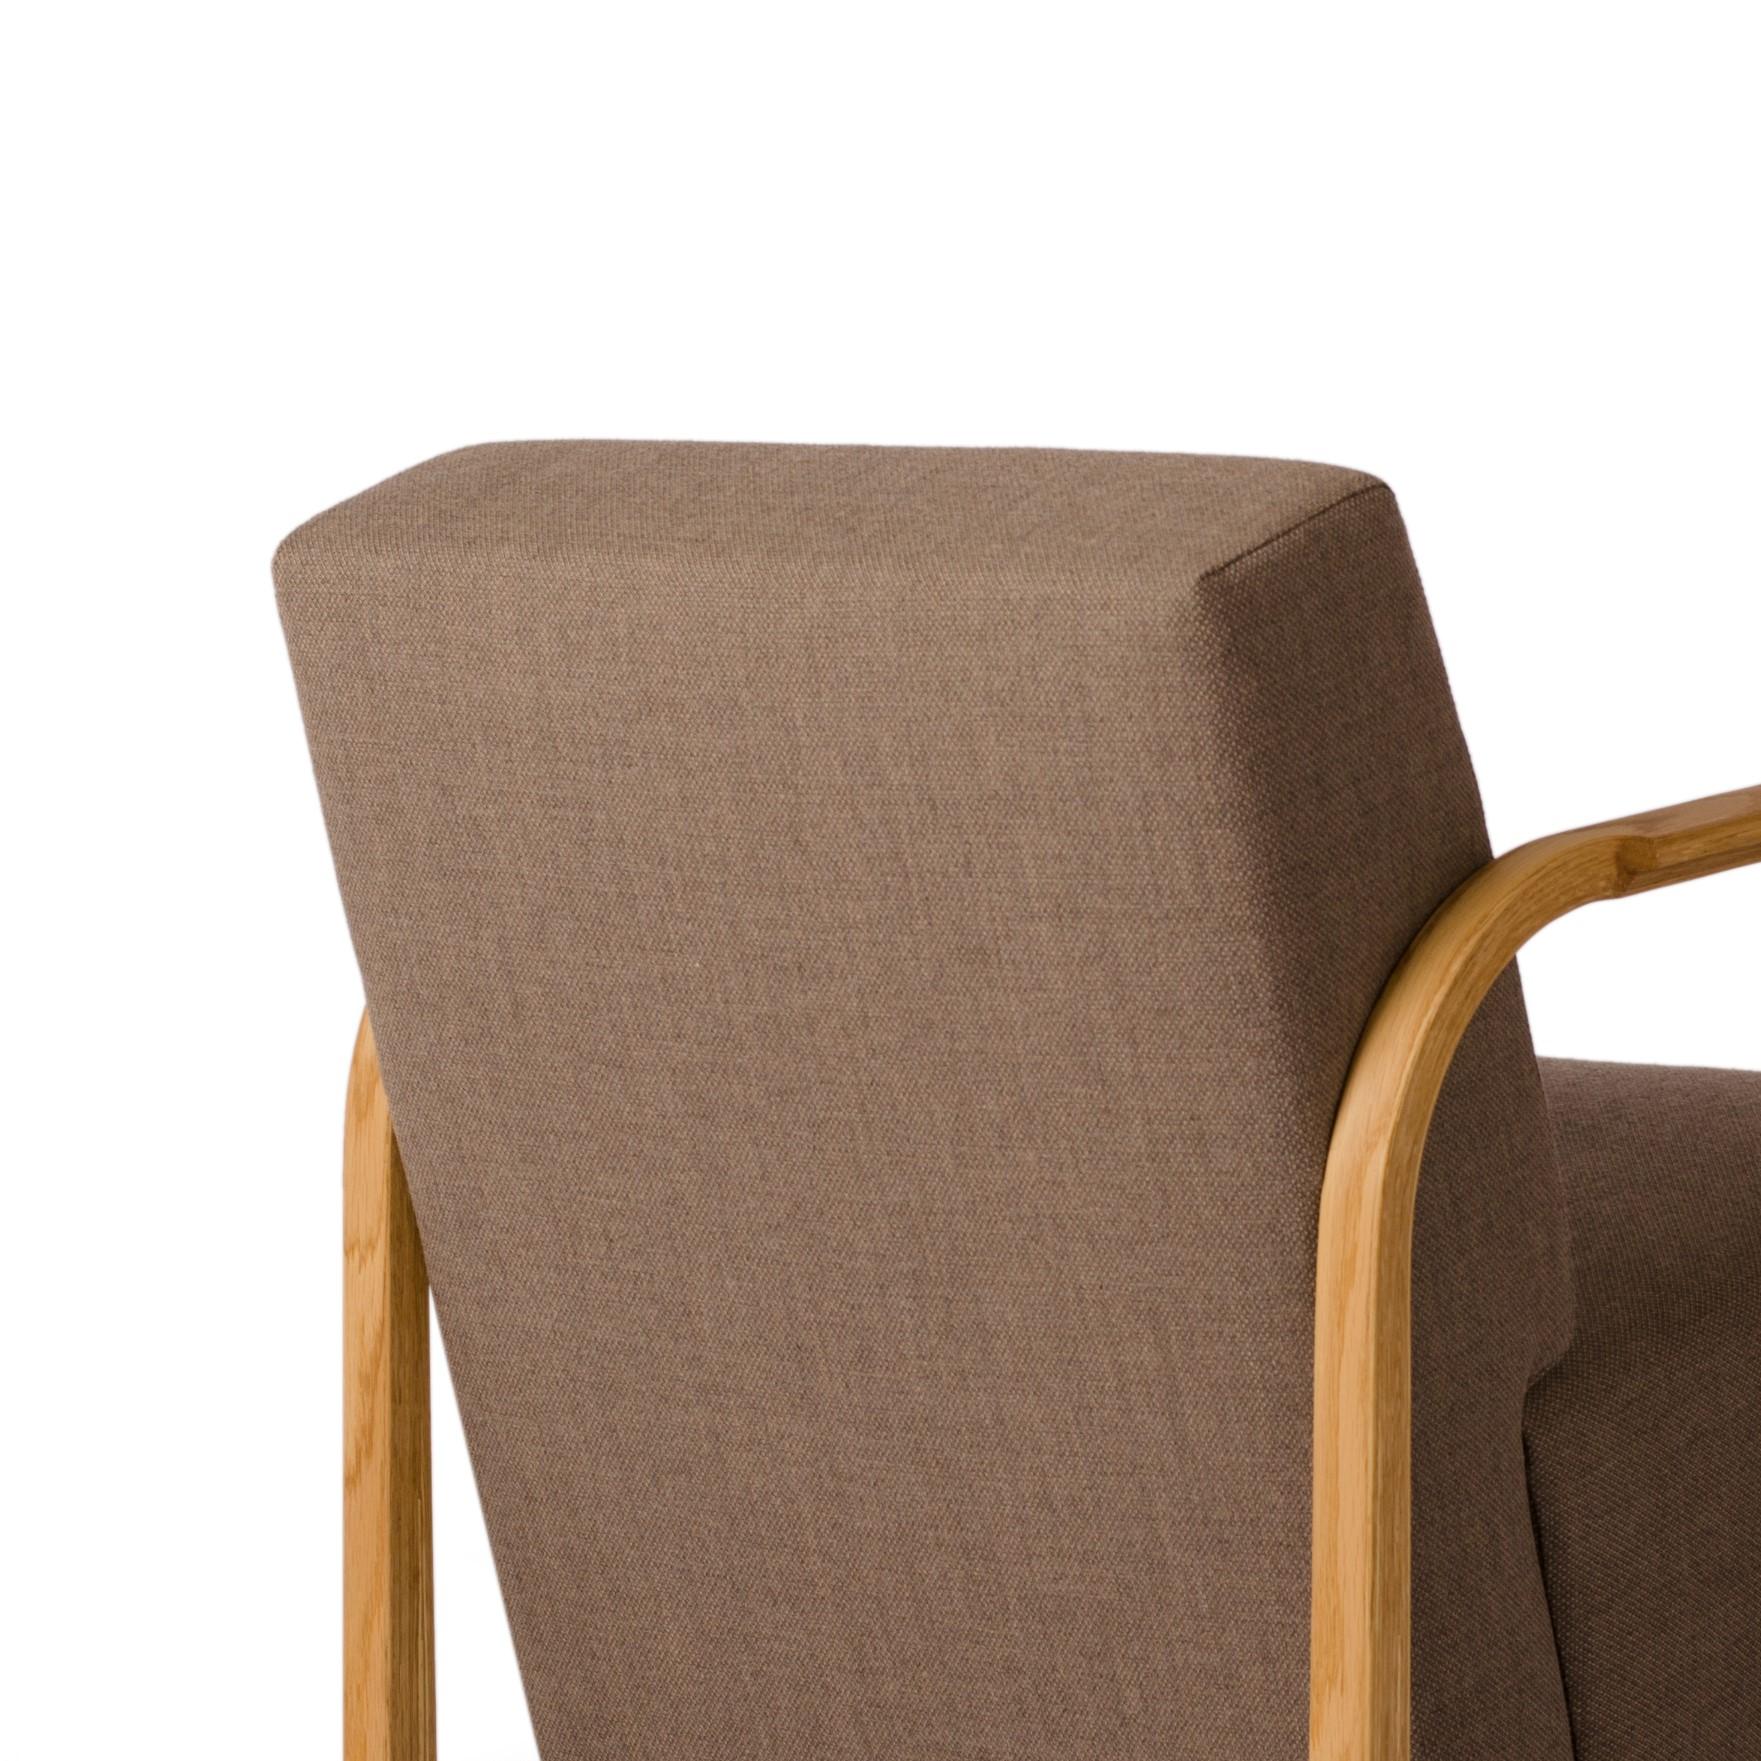 Other KVADRAT/Hallingdal & Fiord ARCH Lounge Chair by Mazo Design